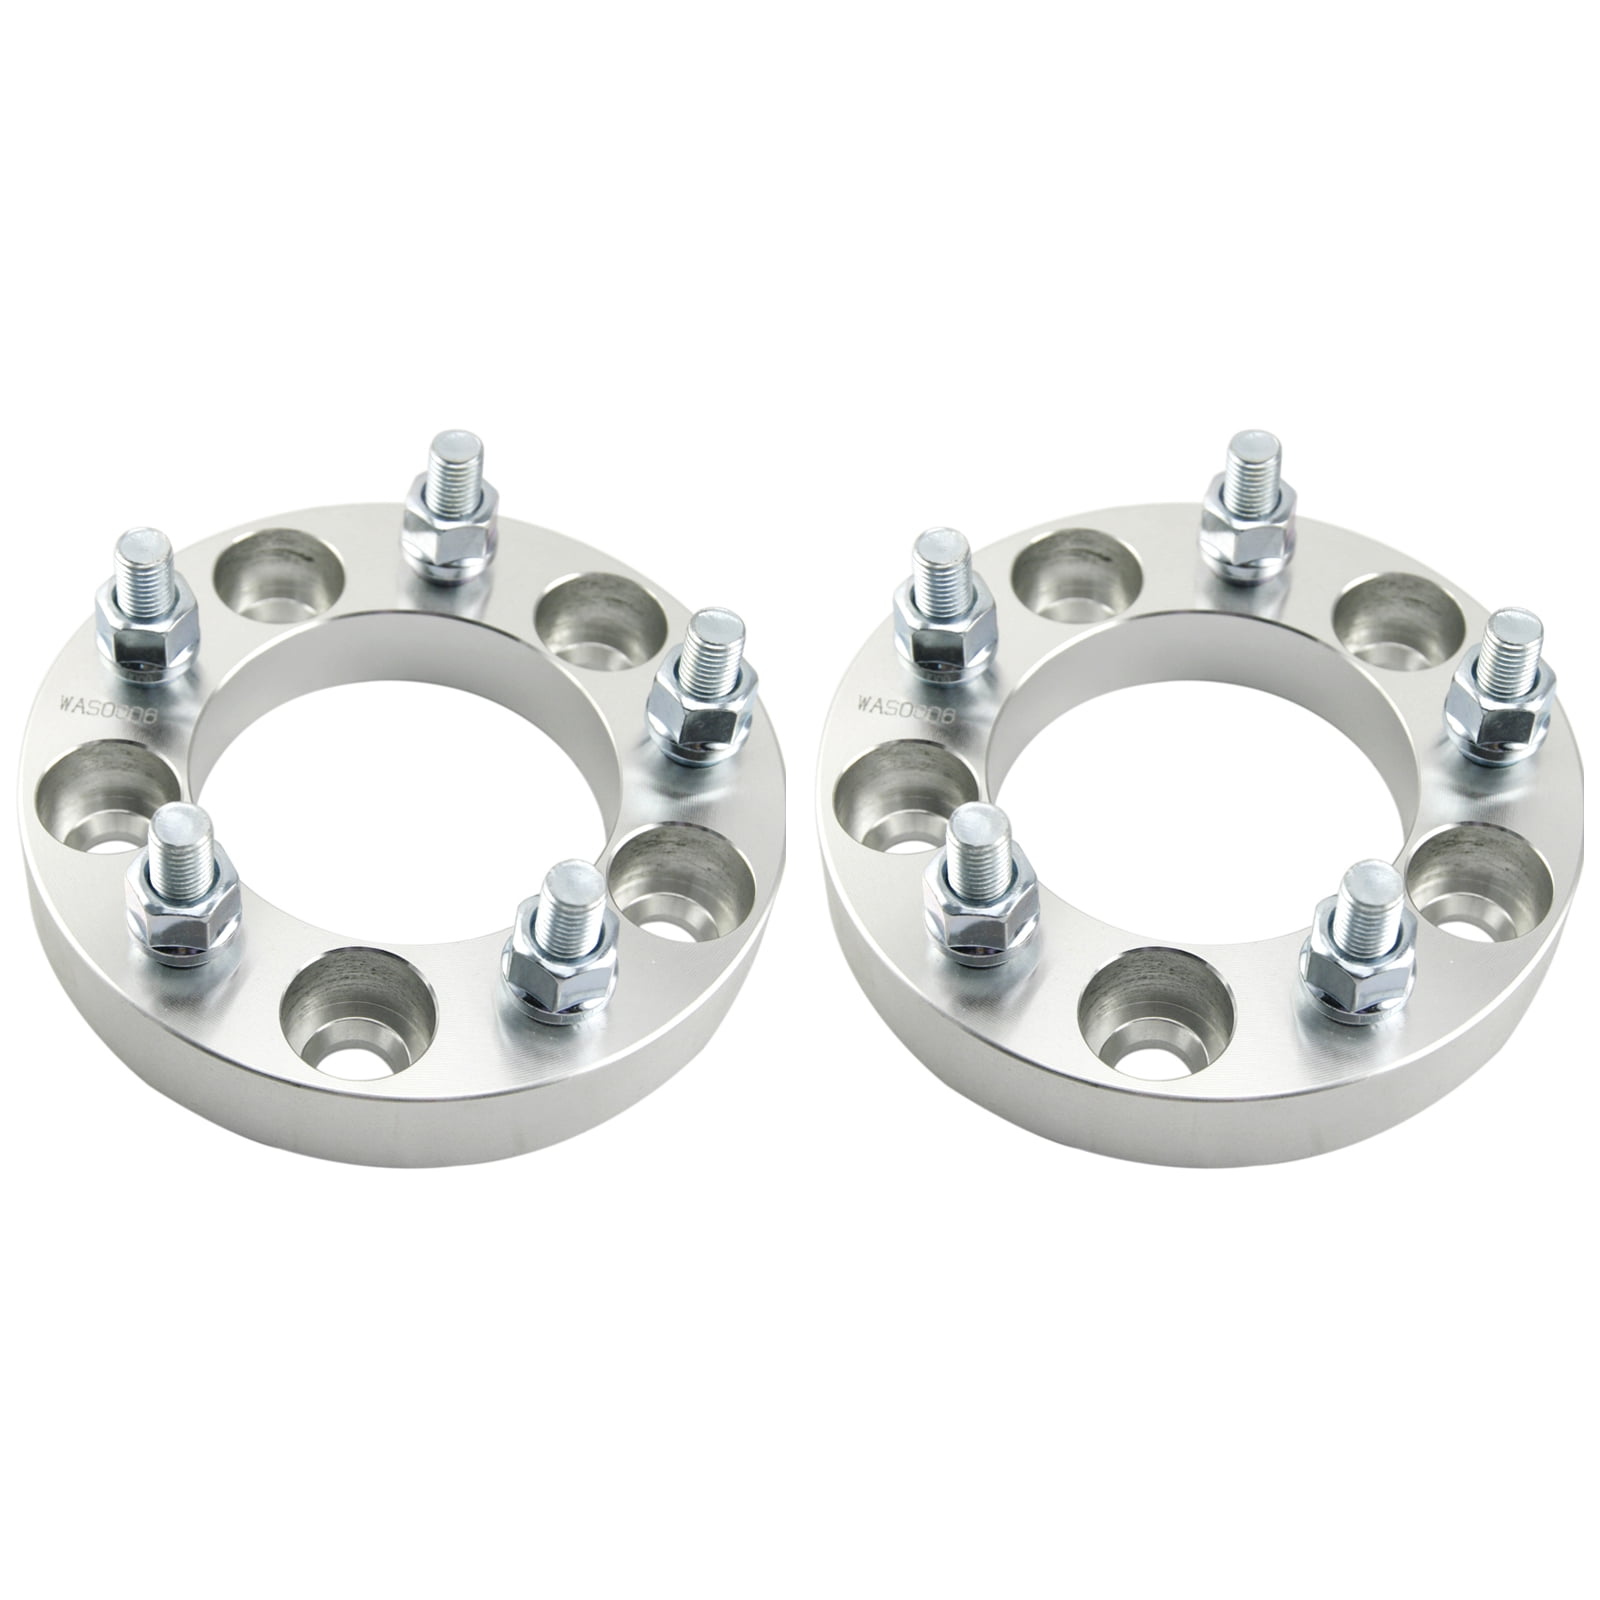 ECCPP 2 INCH Wheel Spacer 5 lug 2X 2 5x4.75 TO 5X4.75 70.5mm for 1982-2004 Chevrolet S10 1982-2004 Chevrolet S10 Blazer 1984-2013 Chevrolet Corvette with 12x1.5 Studs 